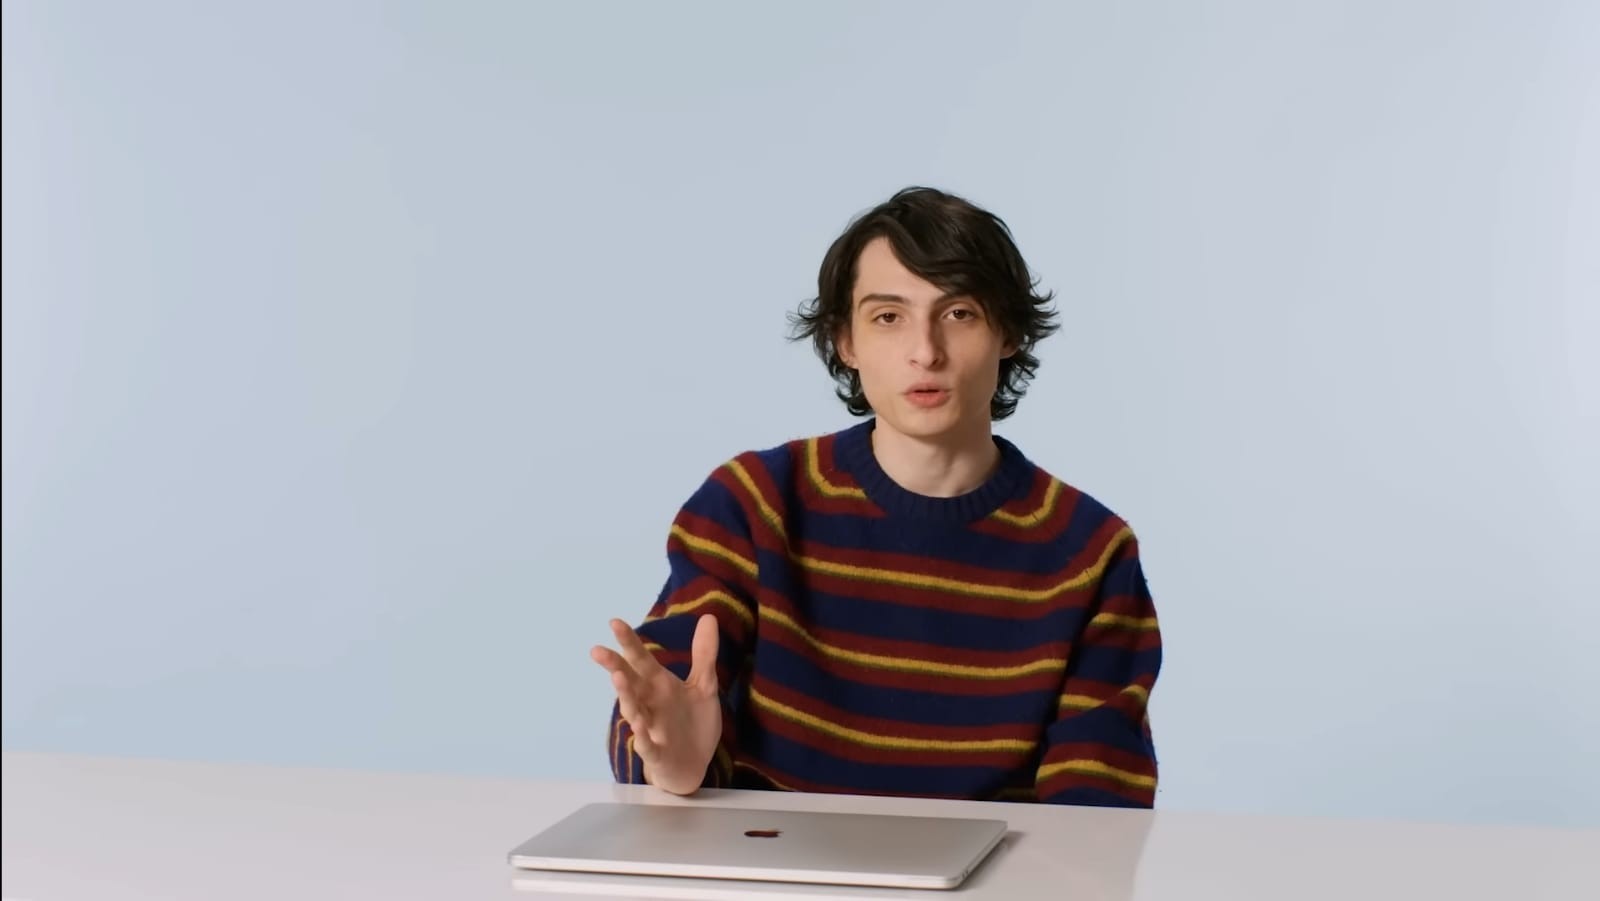 Finn Wolfhard was praised for his acting skills.